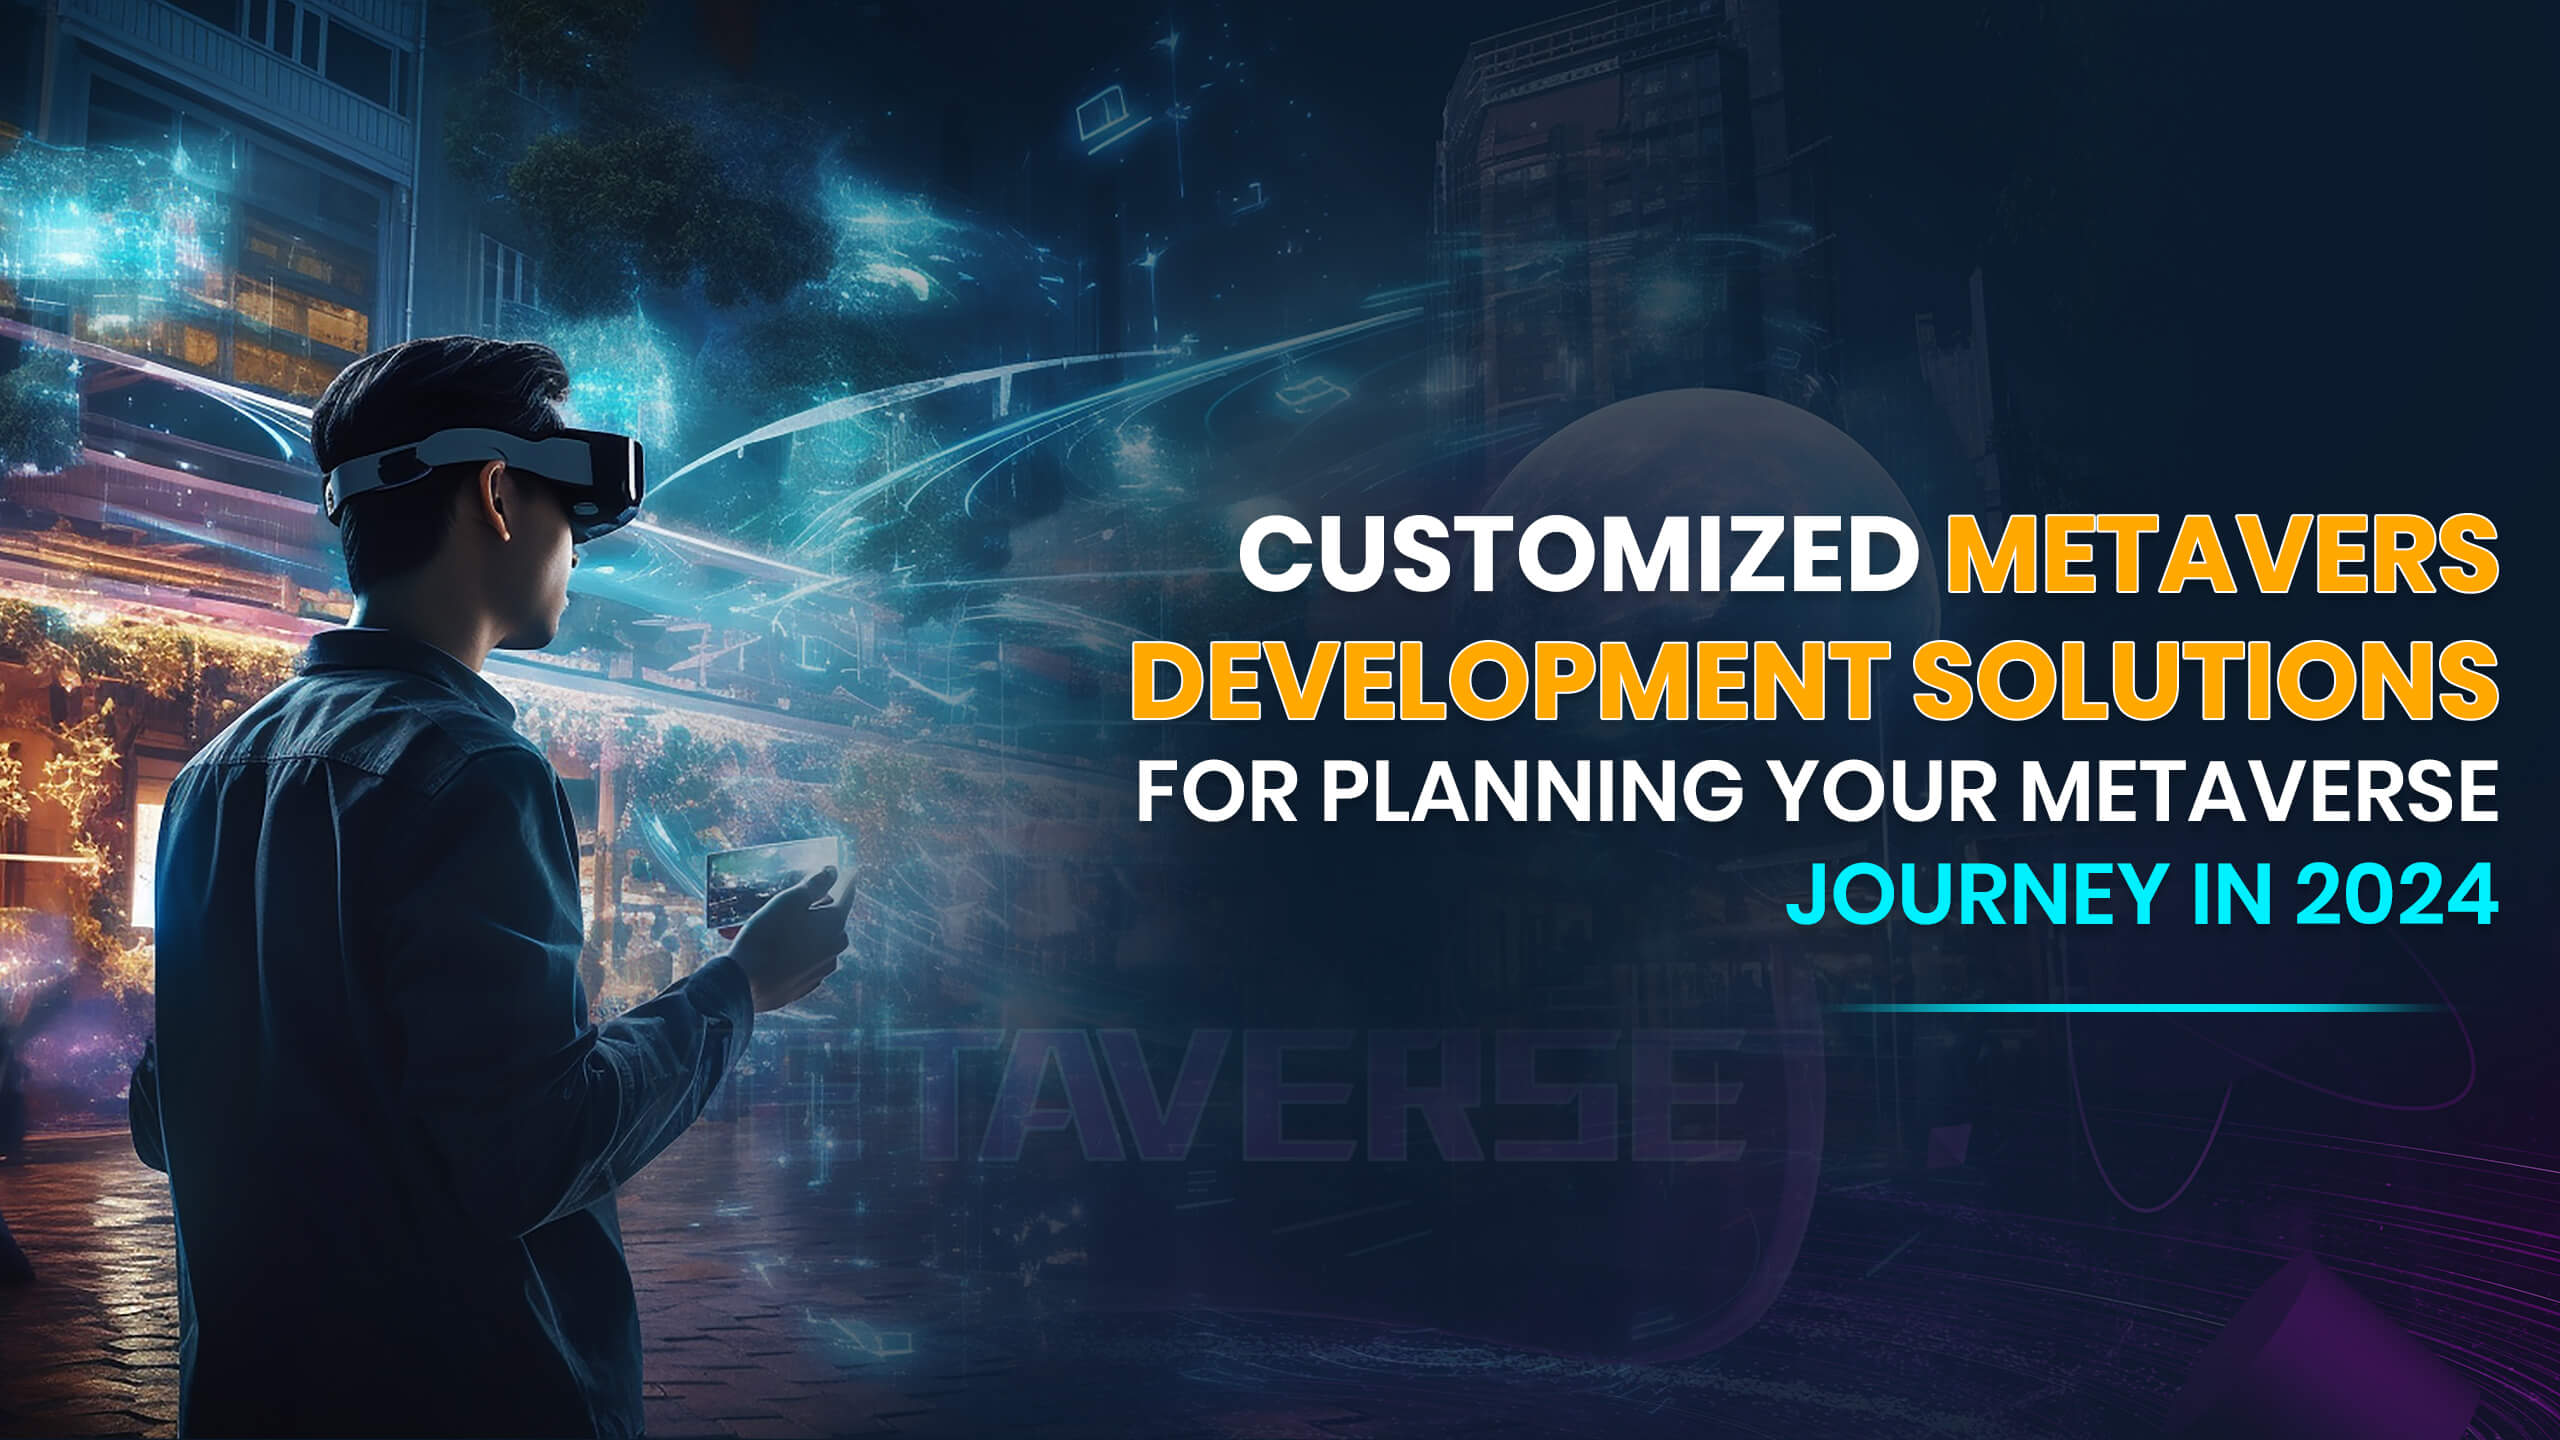 Customized Metaverse Development Solutions for Planning Your Metaverse Journey in 2024